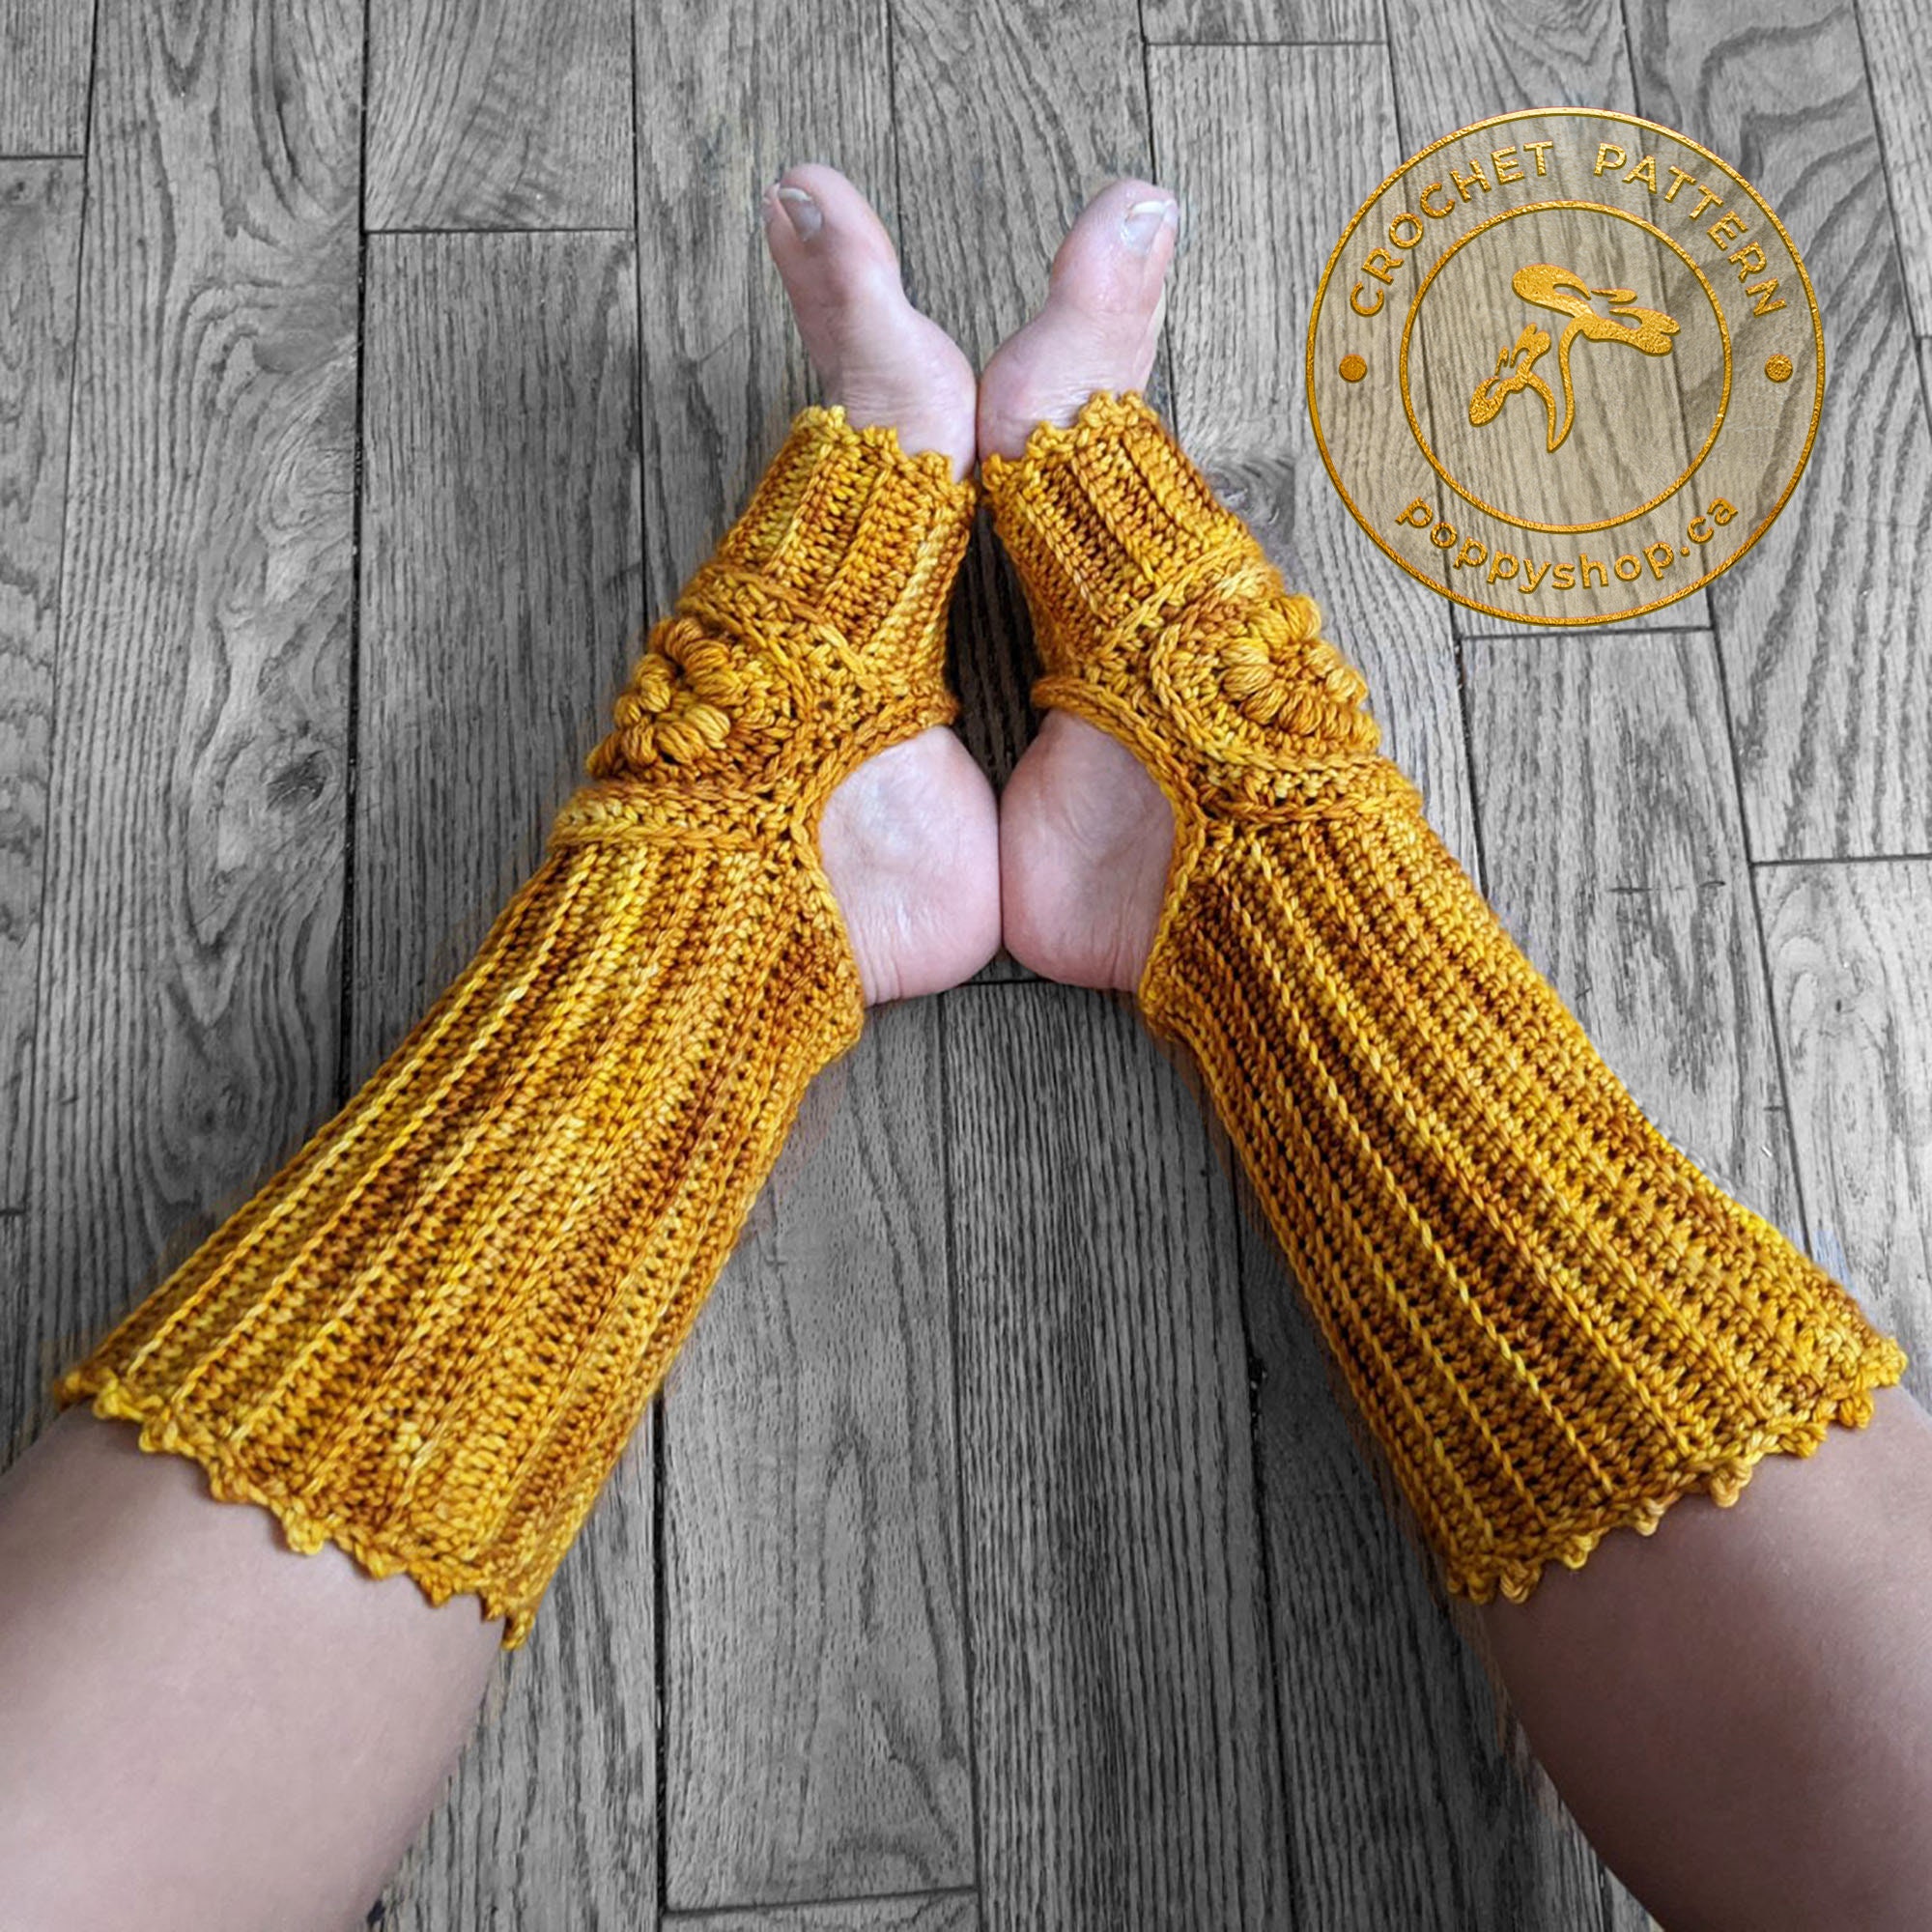 Crochet Your Way to Yoga Bliss with Prana Sock Pattern